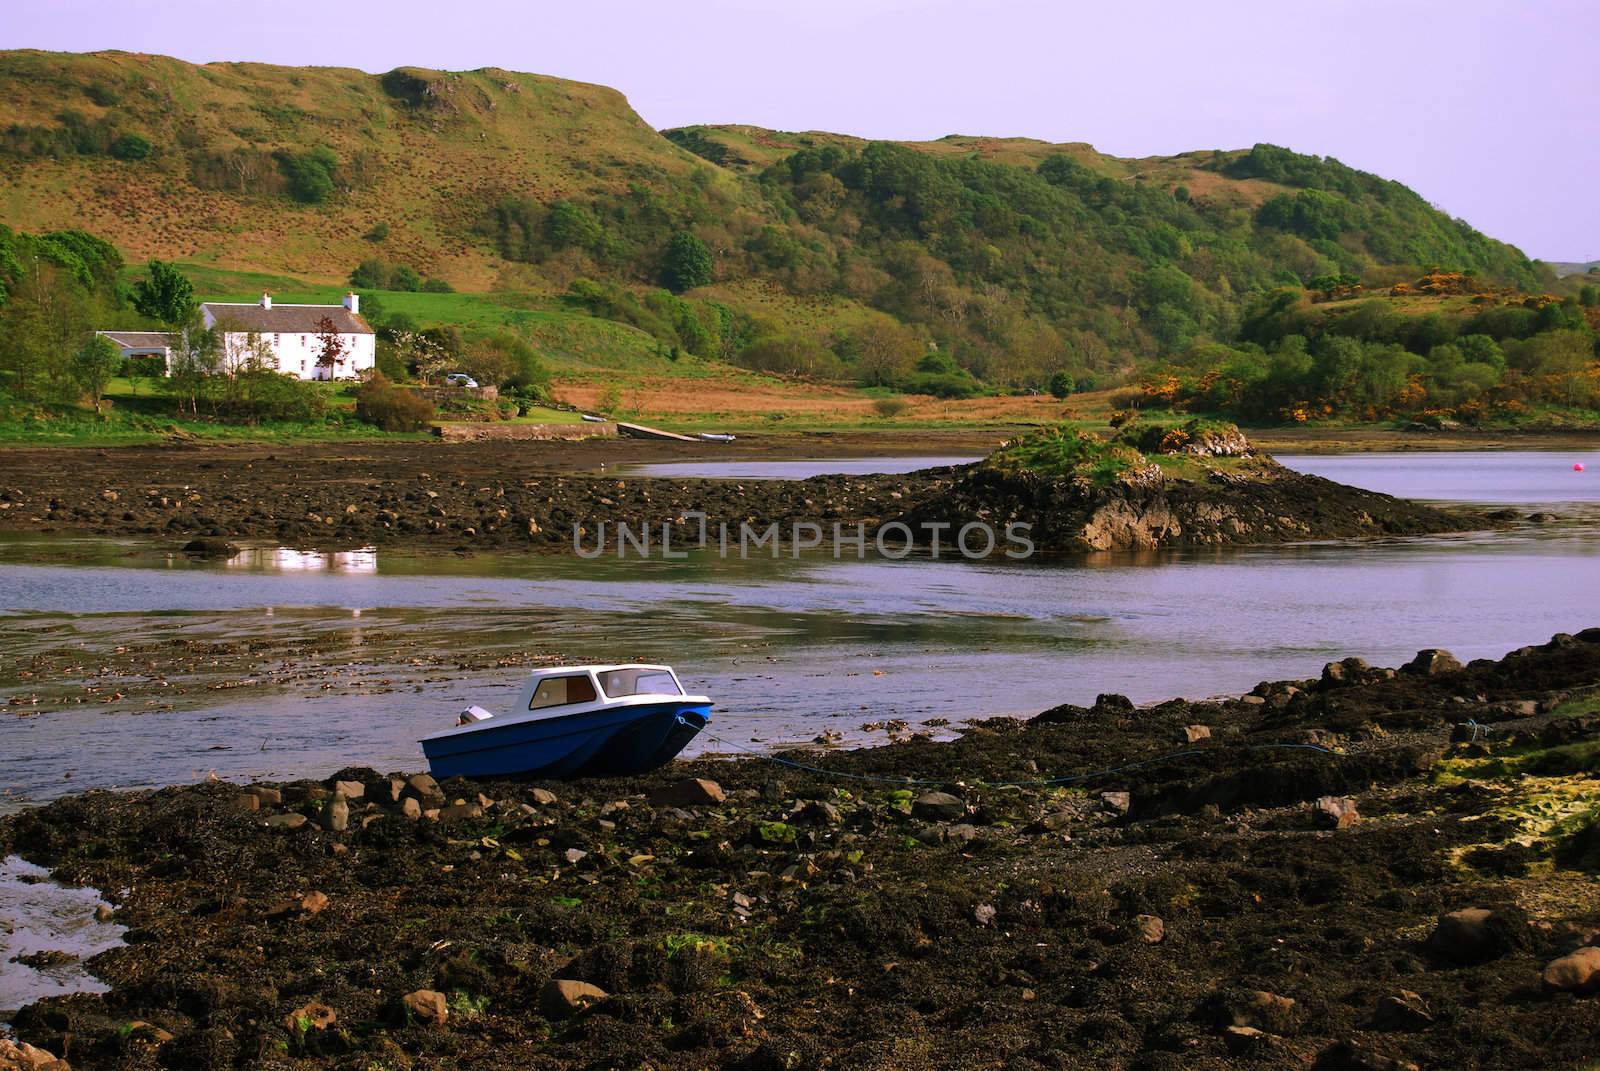 beautiful scenery at the Isle of Seil looking over to scottish mainland